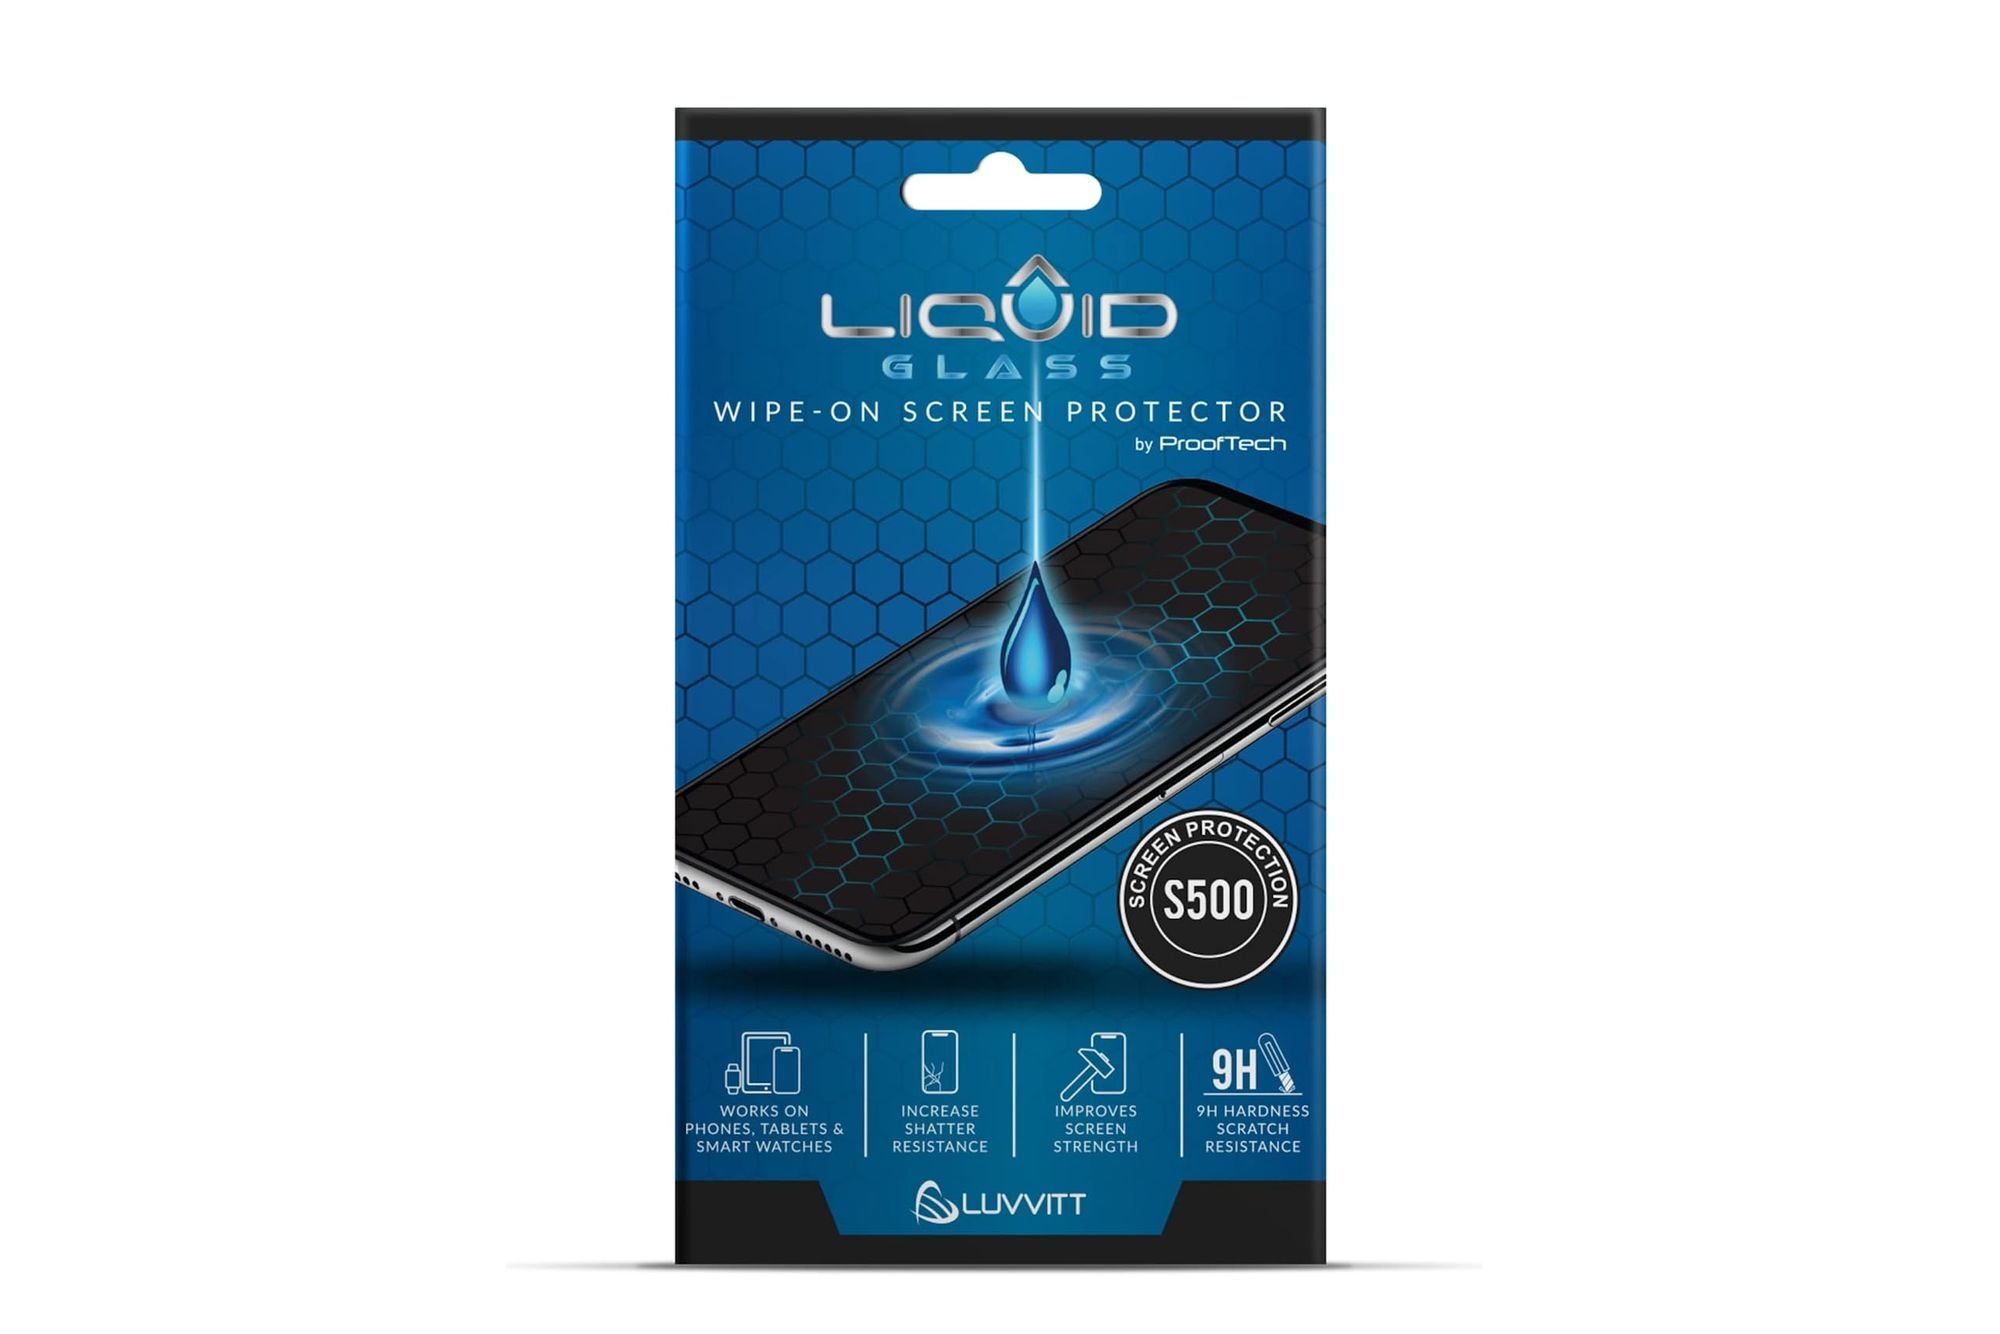 LIQUID GLASS Screen Protector with $500 Coverage - The best Pixel 7 series screen protectors - out handpicked models